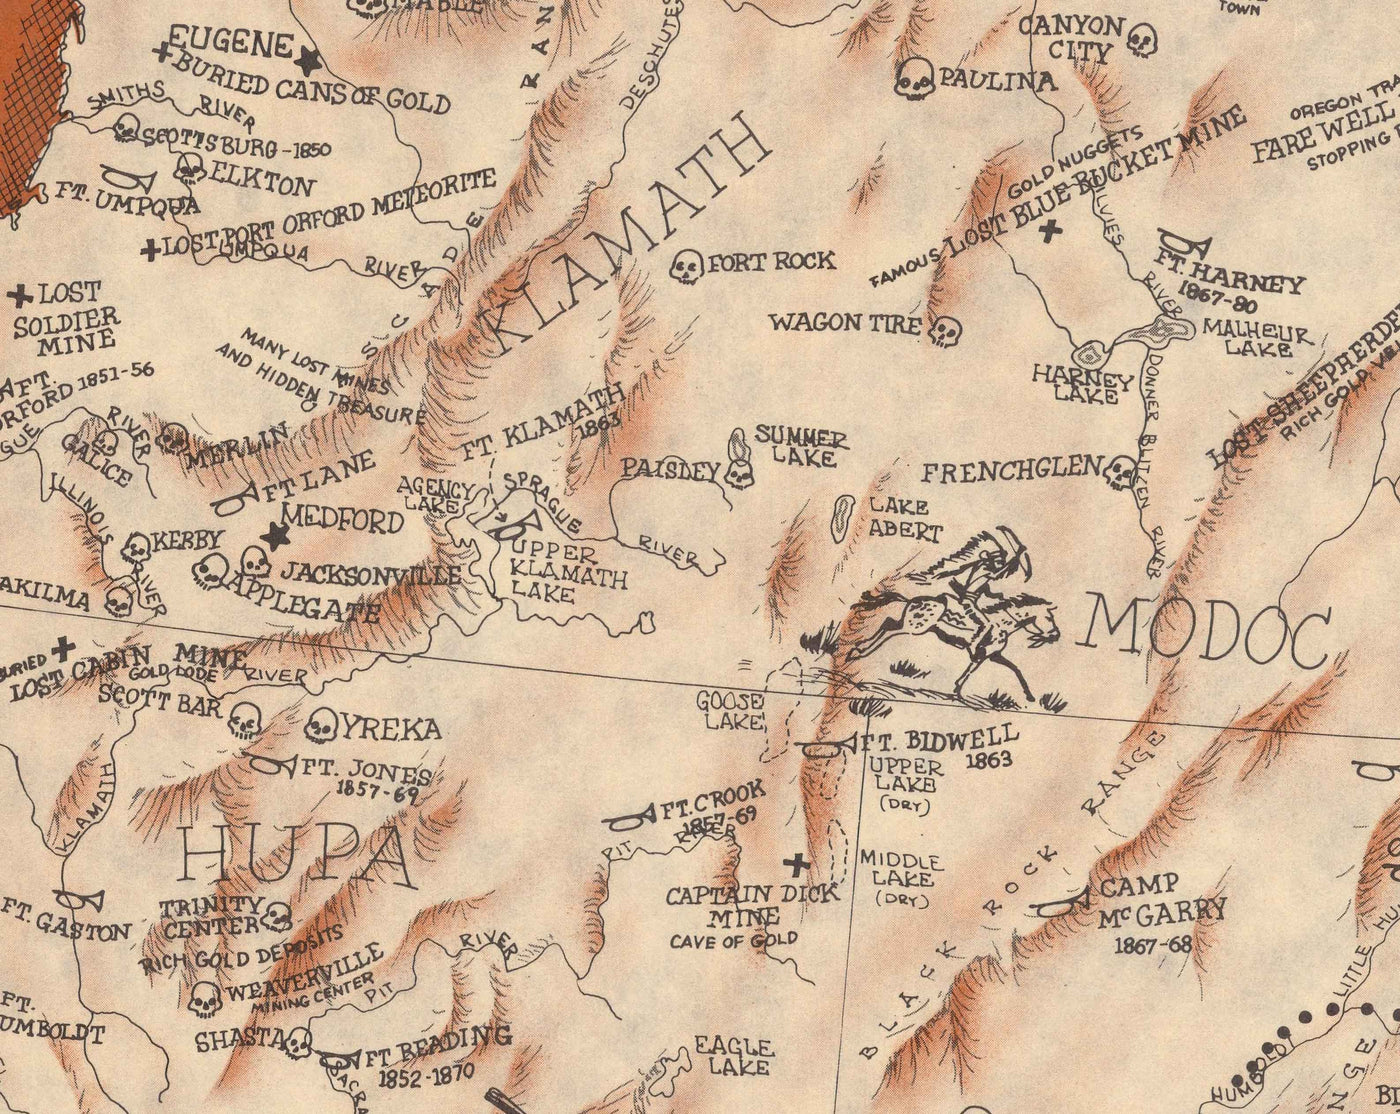 Old Map of the American Wild West by Andy Dagosta in 1968 - Cowboys, Indians, Outlaws, Frontier, Oregon Trail